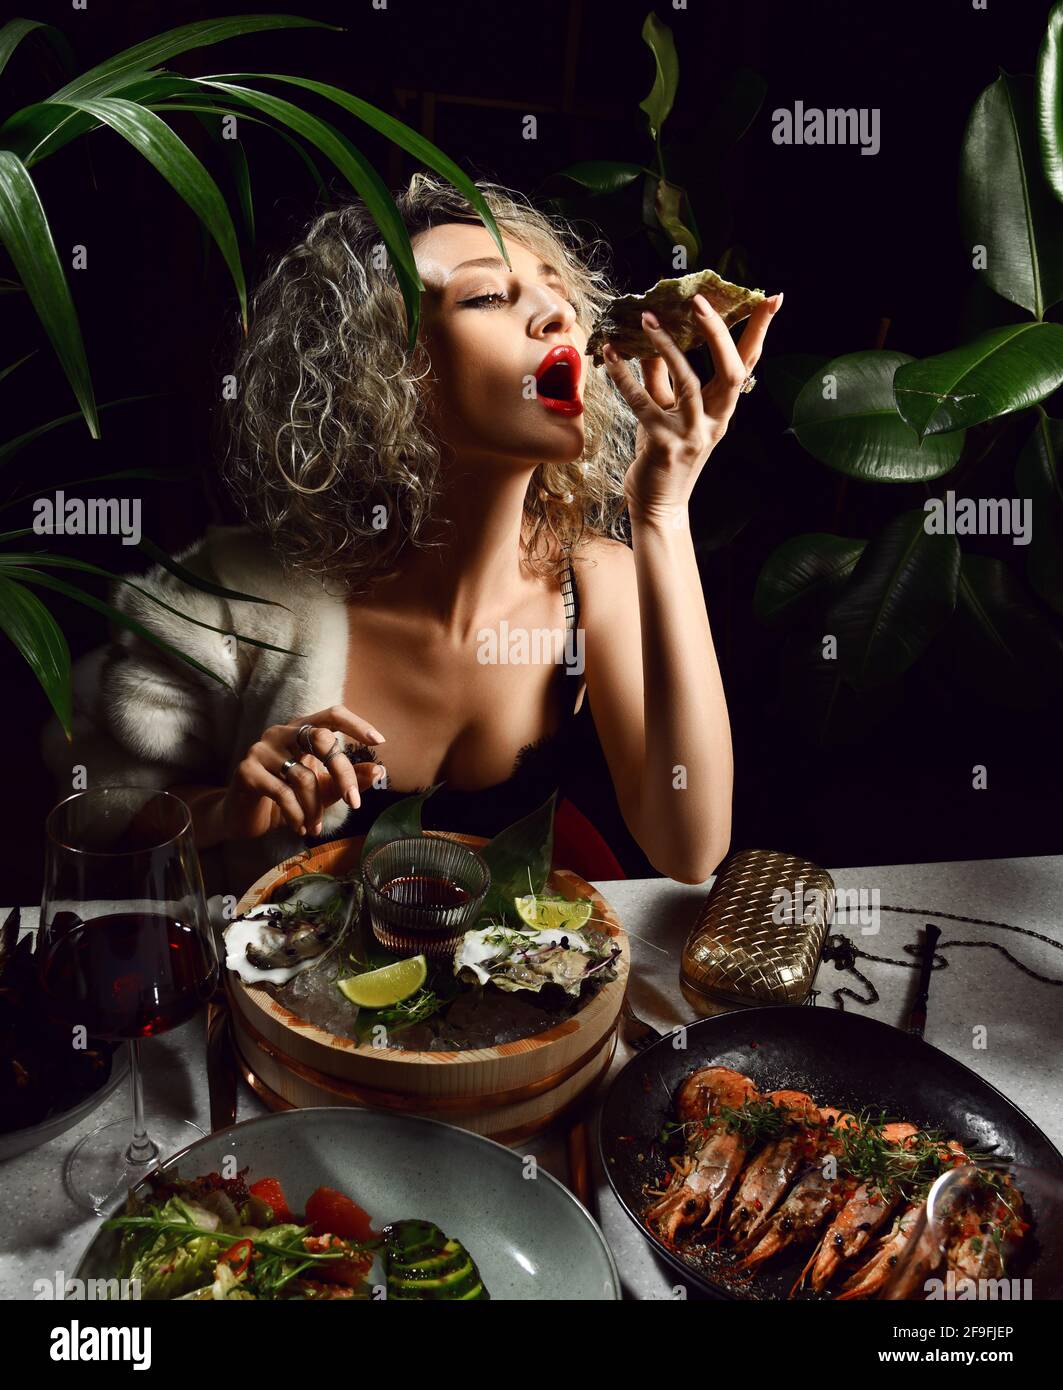 Young blonde woman in evening gown with deep neckline eats seafood oysters, prawns, mussels and salad in restaurant Stock Photo